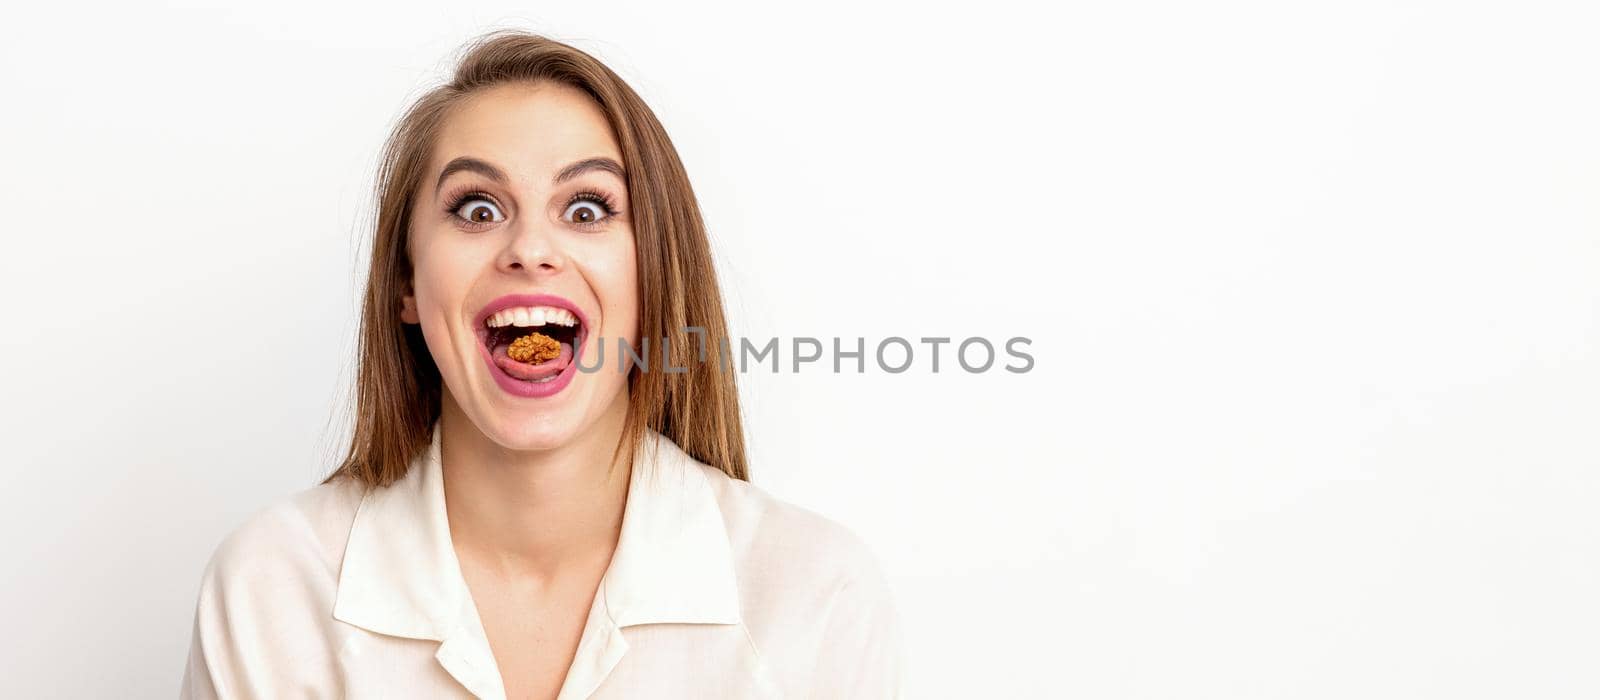 Happy young caucasian woman eating walnuts with an open mouth on white background with copy space